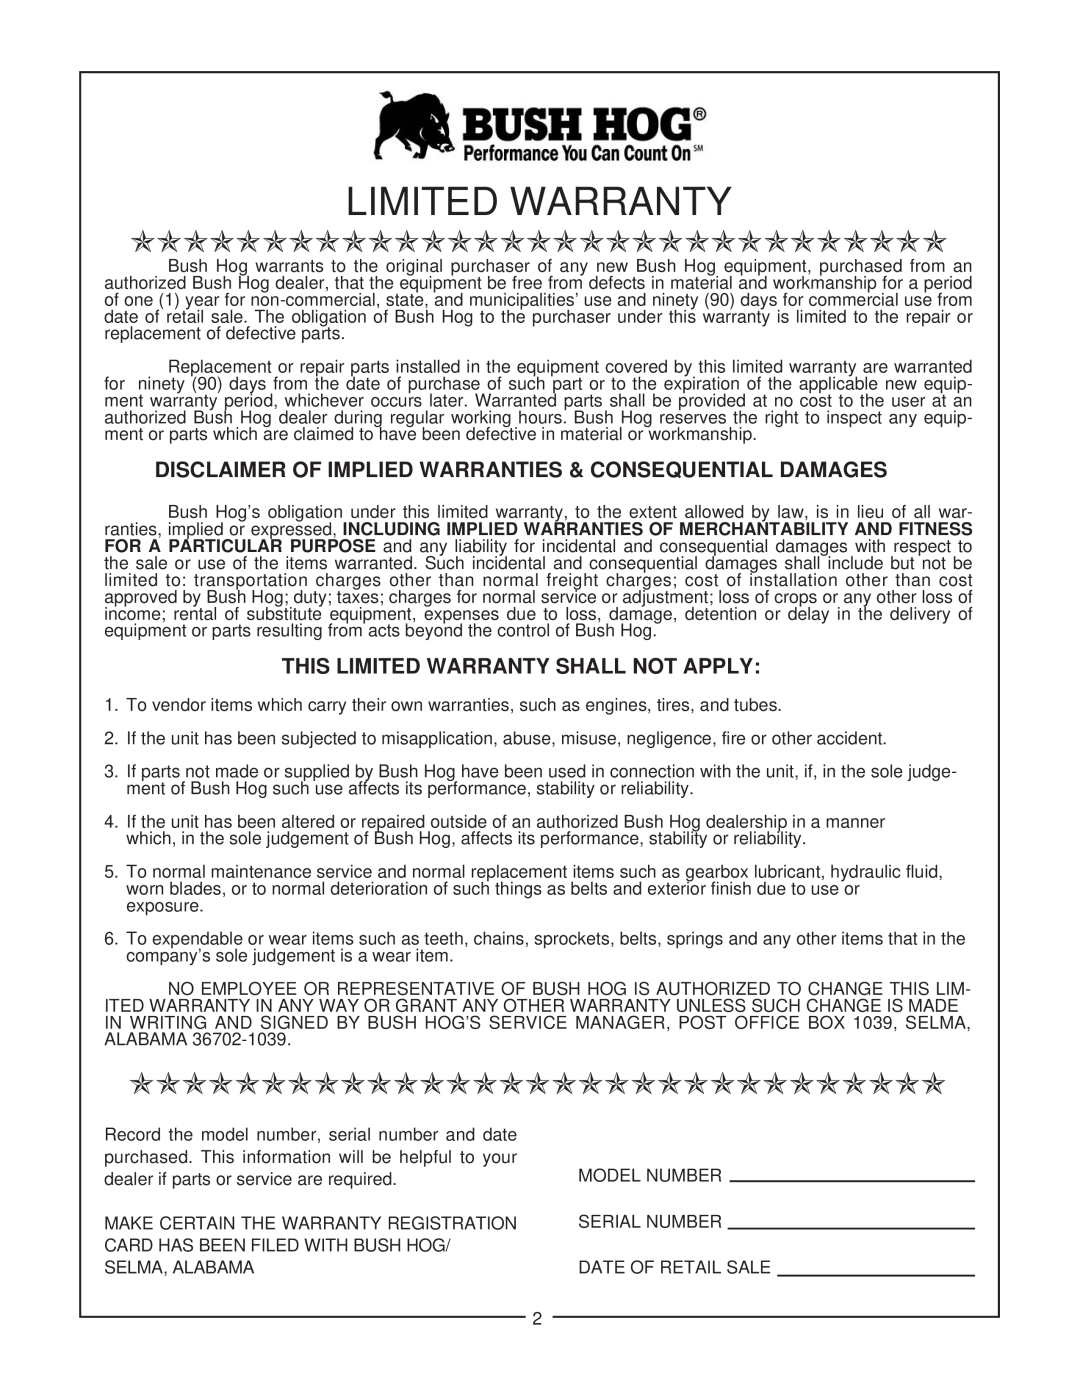 Bush Hog BBC 60, BBC 48 Disclaimer Of Implied Warranties & Consequential Damages, This Limited Warranty Shall Not Apply 